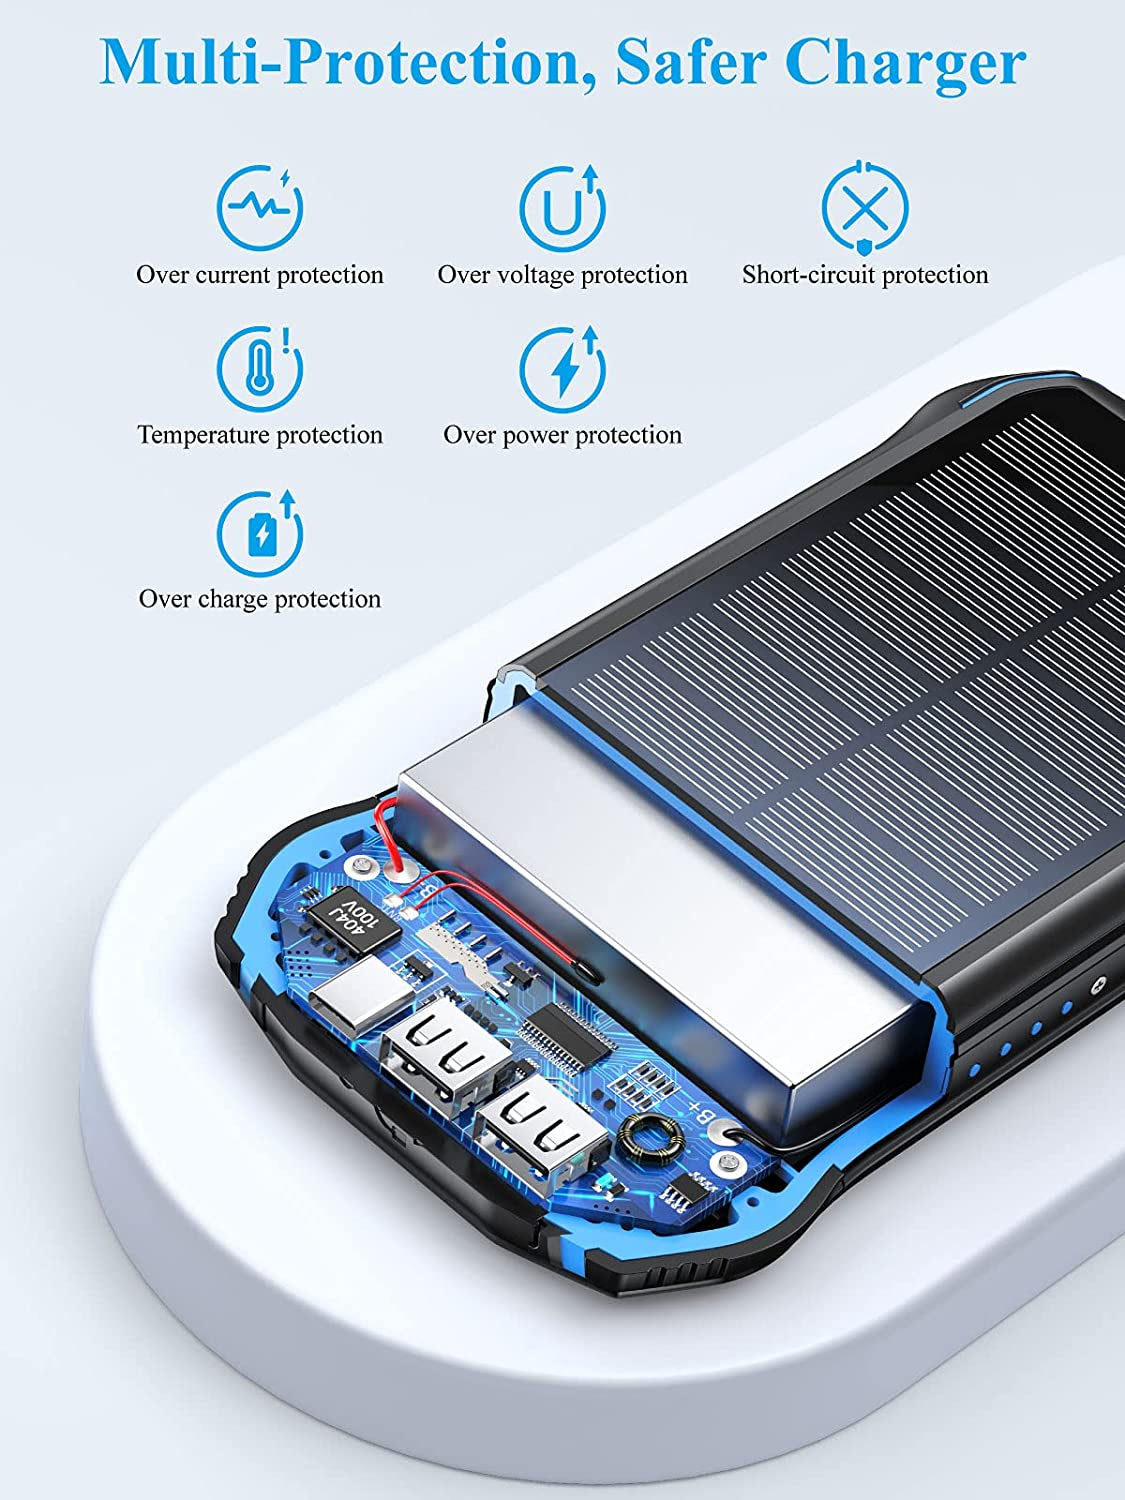 Aonidi Solar Power Bank, Portable Charger 26800Mah with 5V 3.1A Output 2 Inputs, Outdoor Battery Pack with Flashlight IP66 Waterproof Battery Bank for Iphone Android Cell Phones